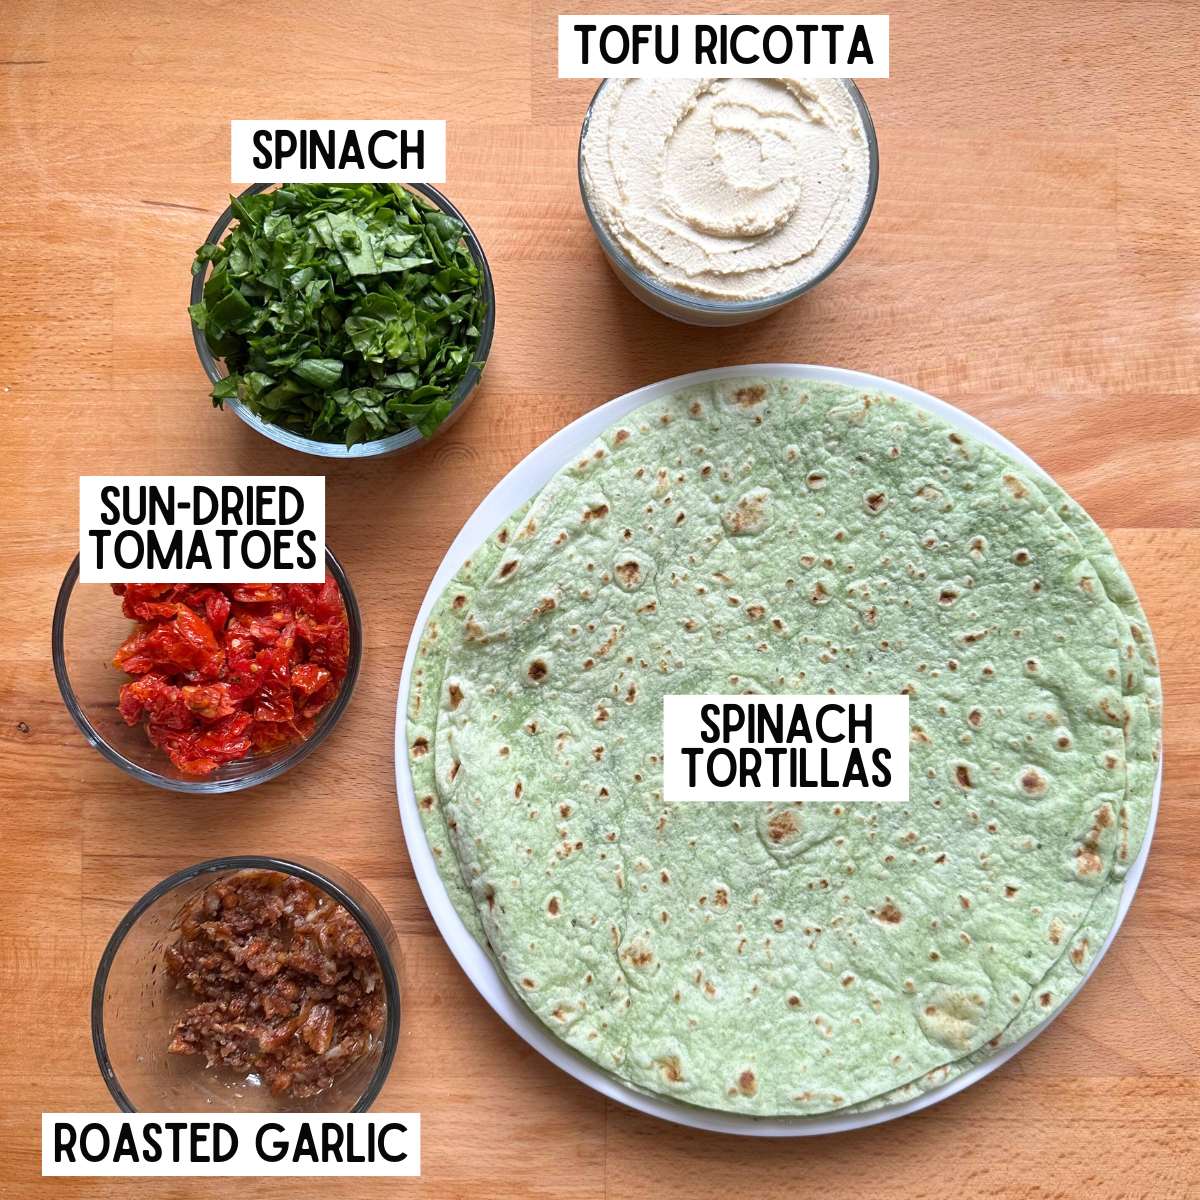 Ingredients to make vegan pinwheels with corresponding labels: tofu ricotta, spinach, sun-dried tomatoes, roasted garlic, and spinach tortillas.